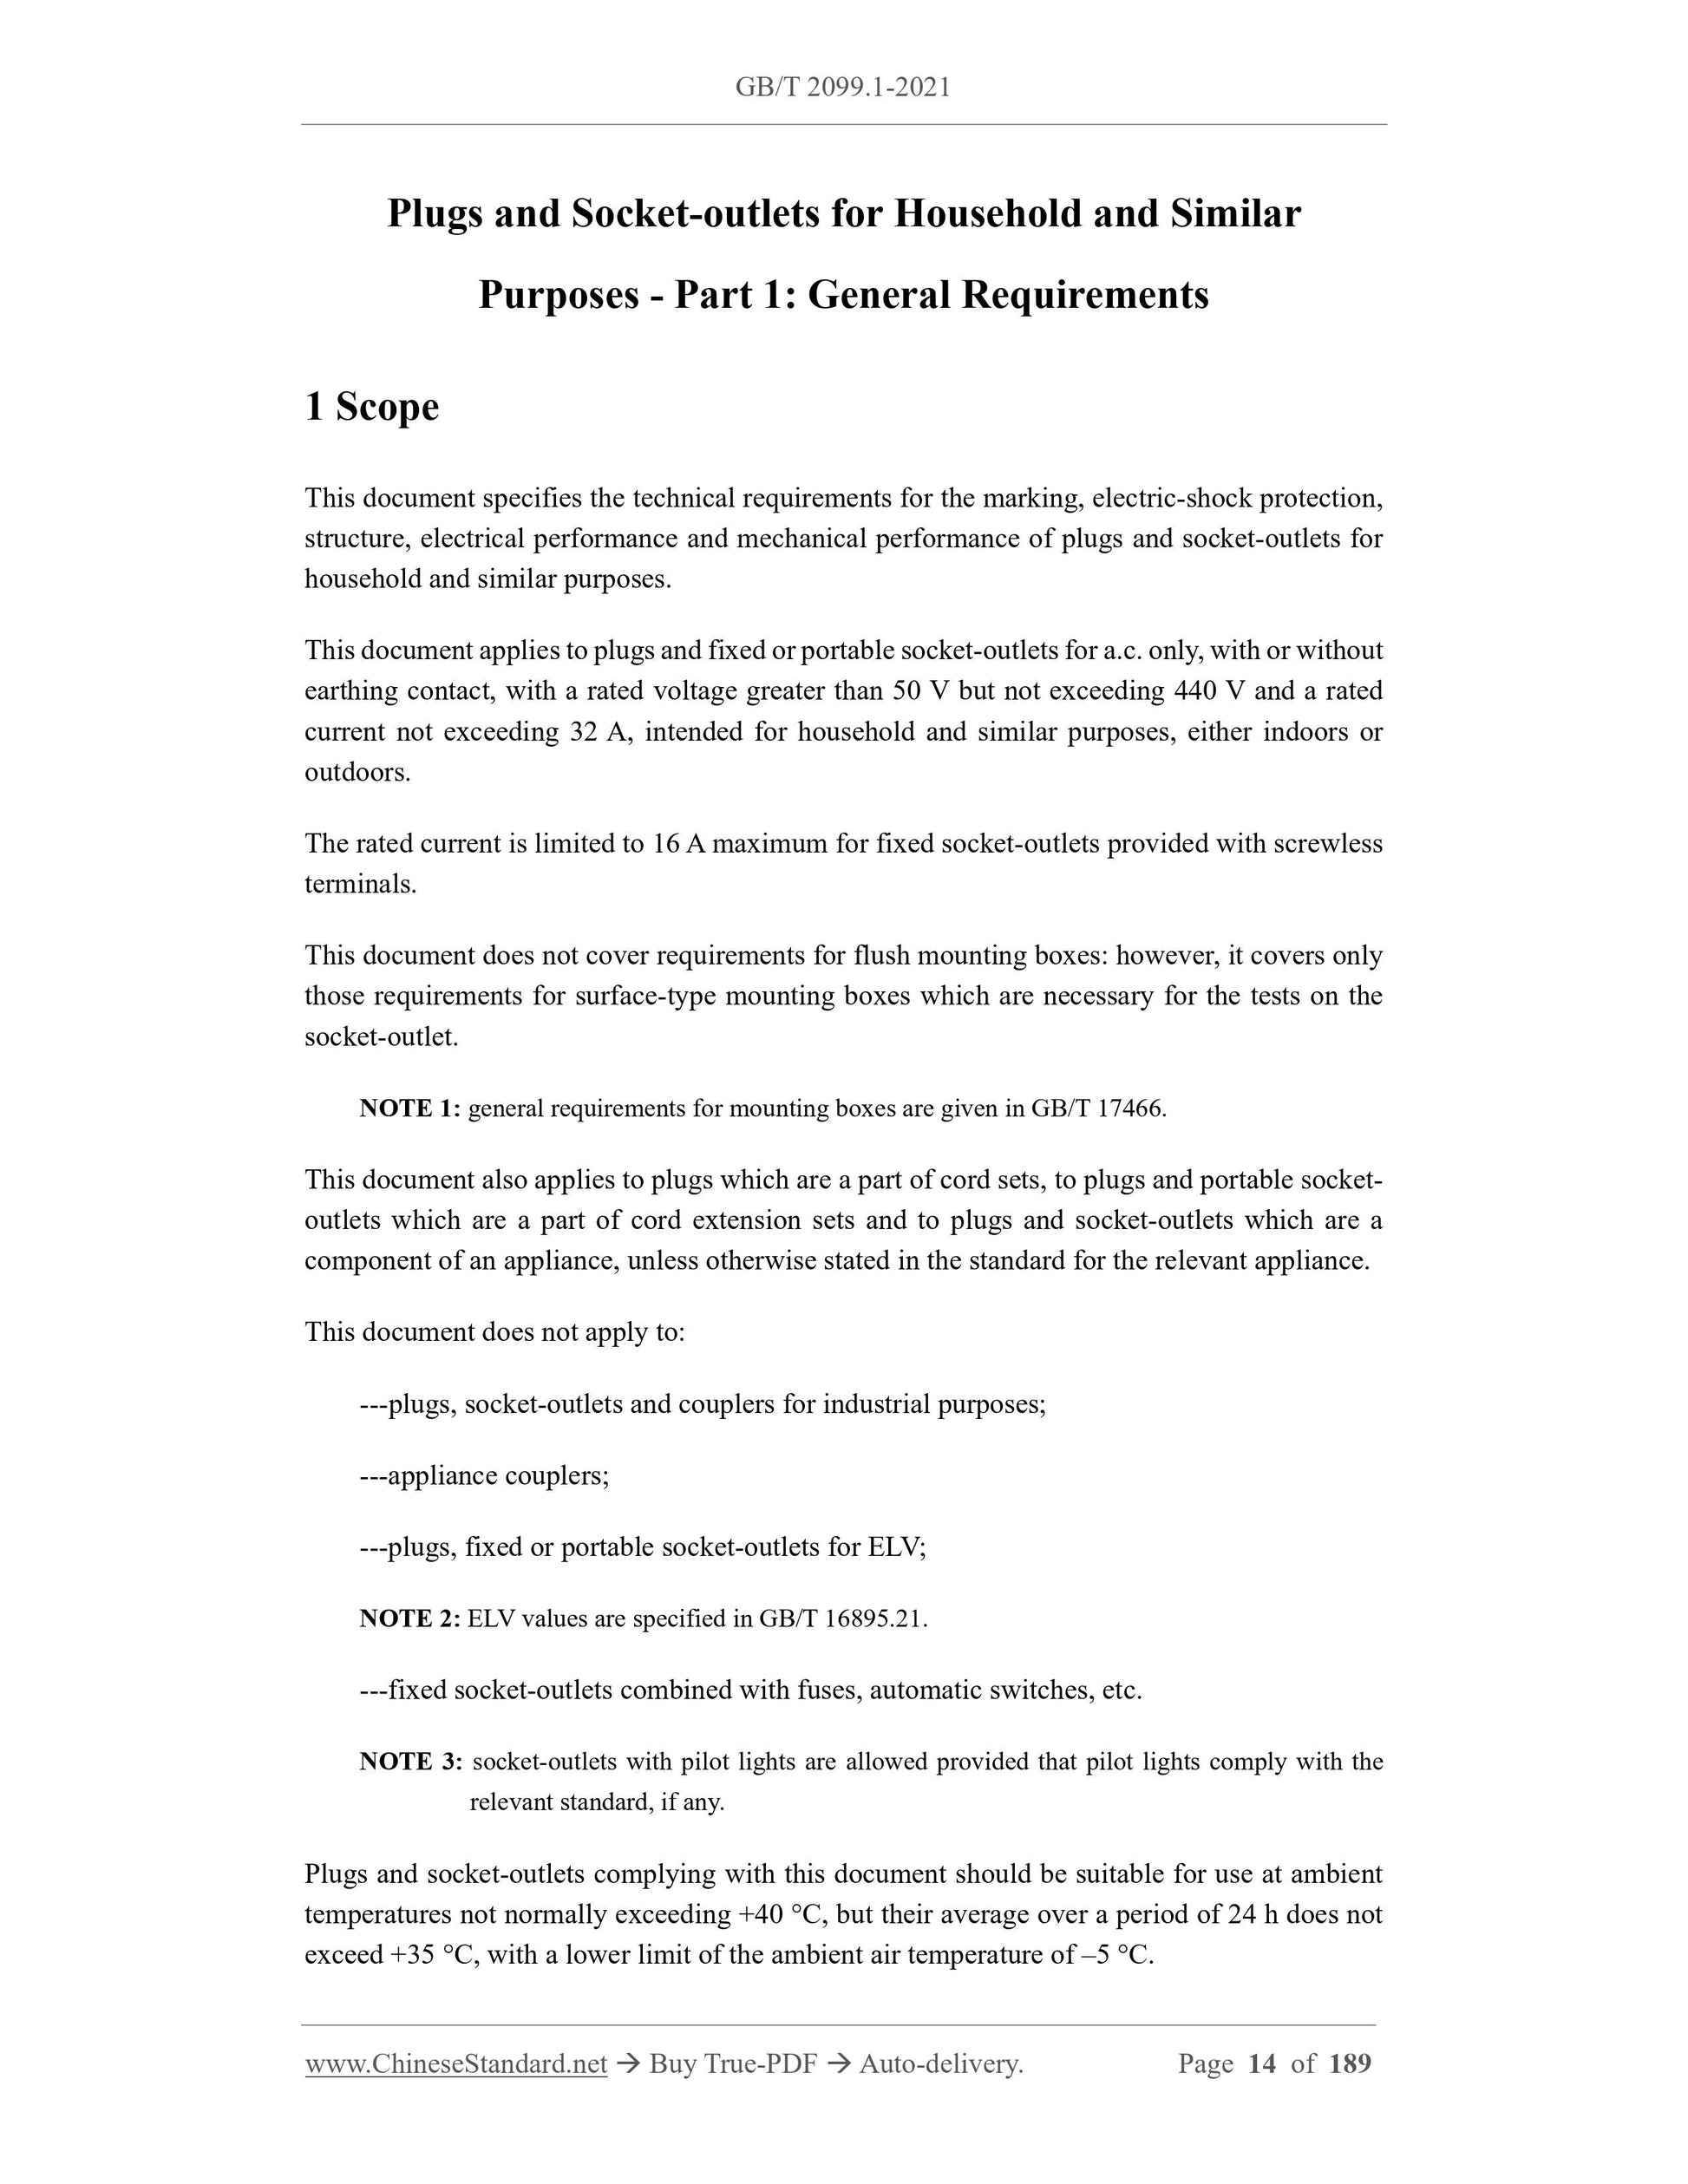 GB/T 2099.1-2021 Page 9